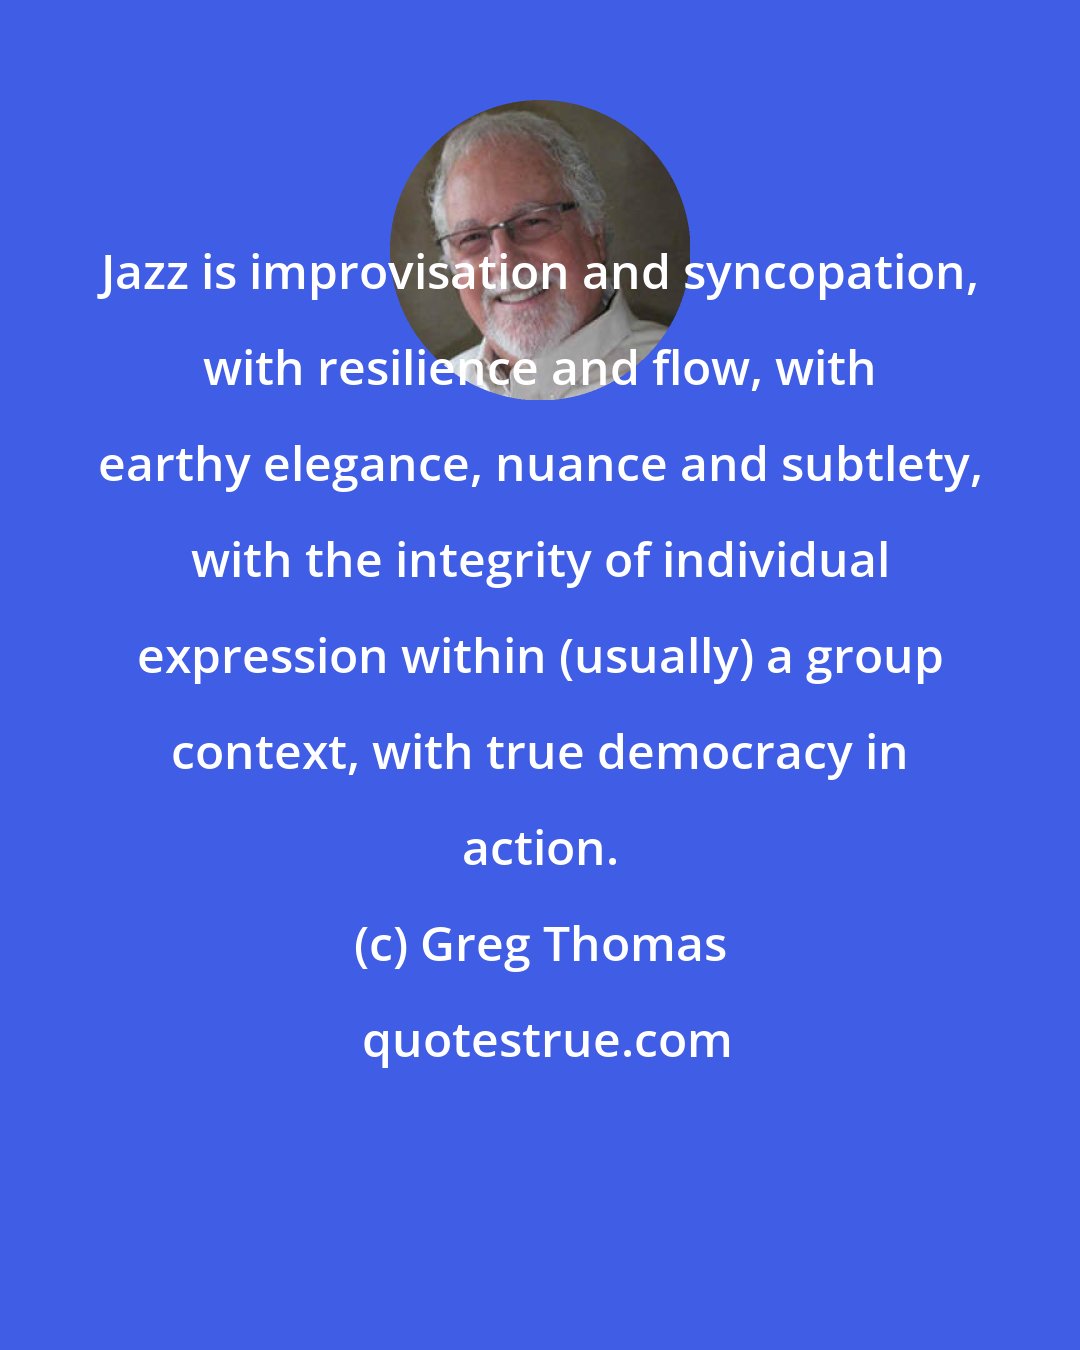 Greg Thomas: Jazz is improvisation and syncopation, with resilience and flow, with earthy elegance, nuance and subtlety, with the integrity of individual expression within (usually) a group context, with true democracy in action.